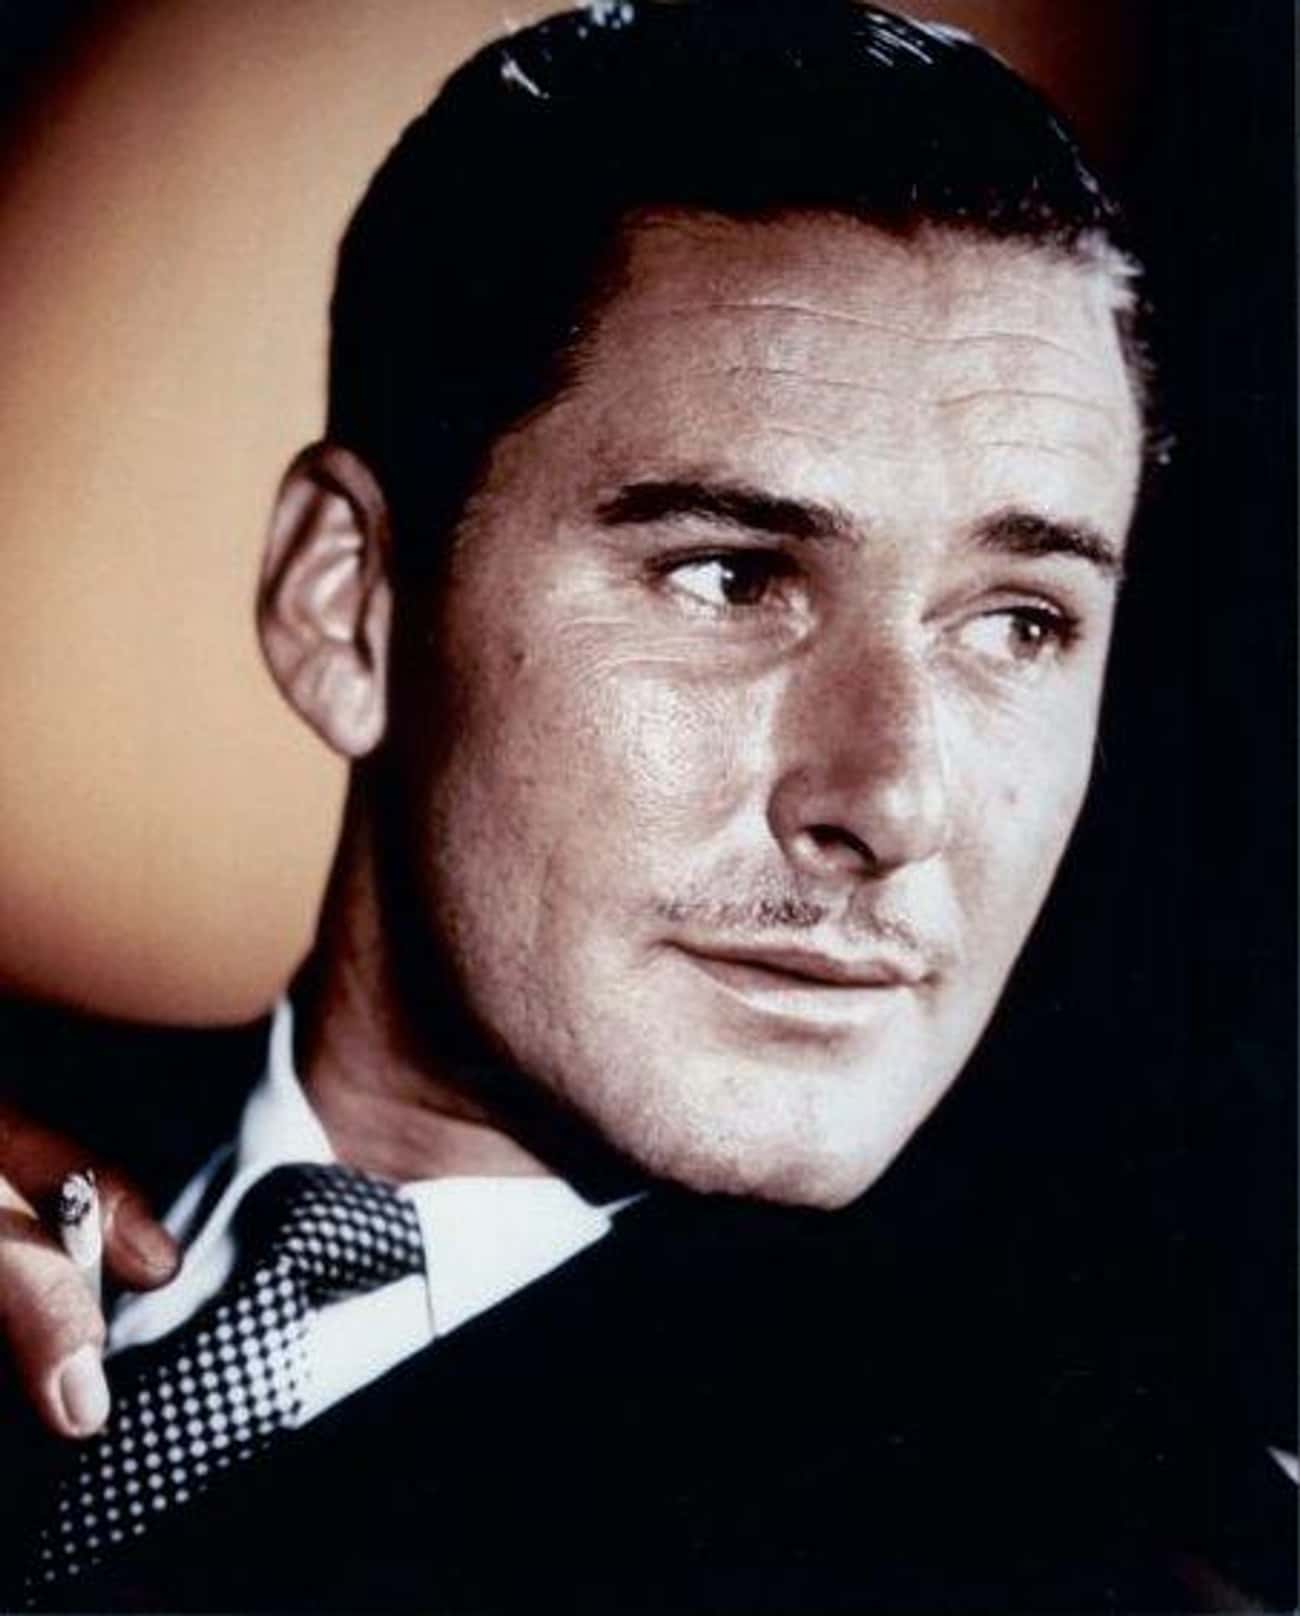 Errol Flynn Injected Vodka Into Oranges For A 'Healthy' Snack